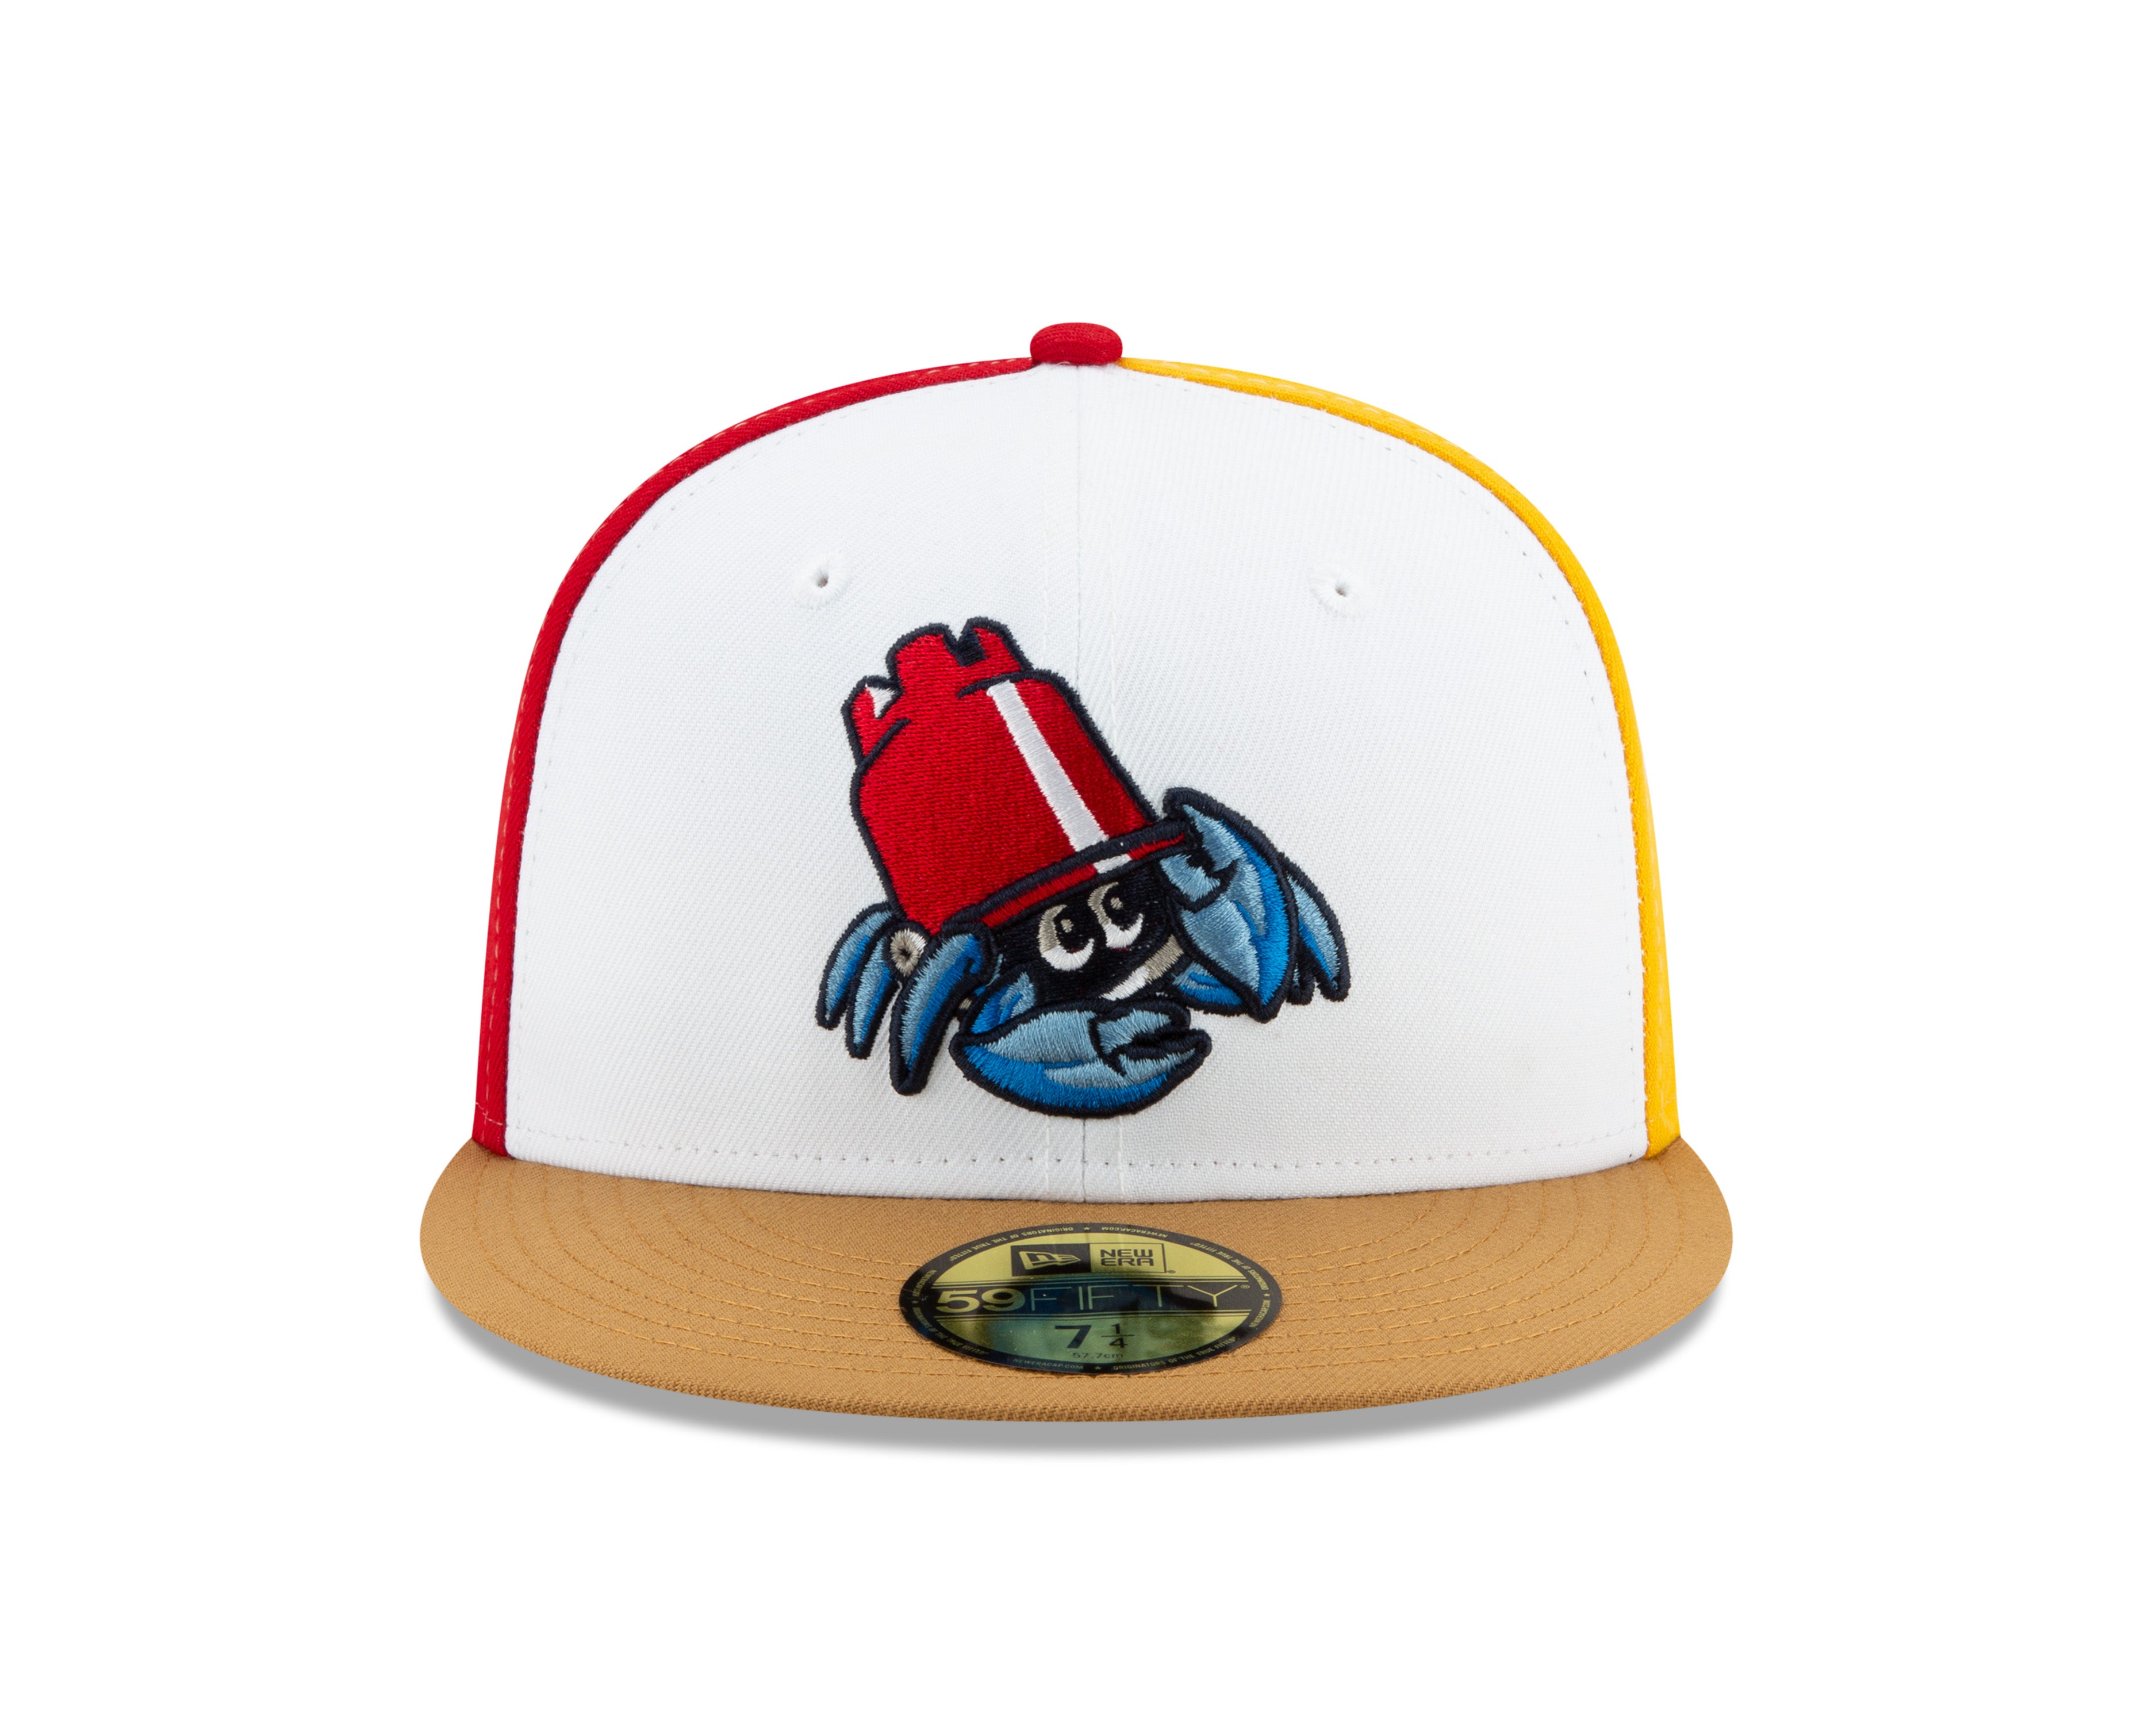 Jersey Shore BlueClaws Alternate 2 Fitted Hat – Jersey Shore